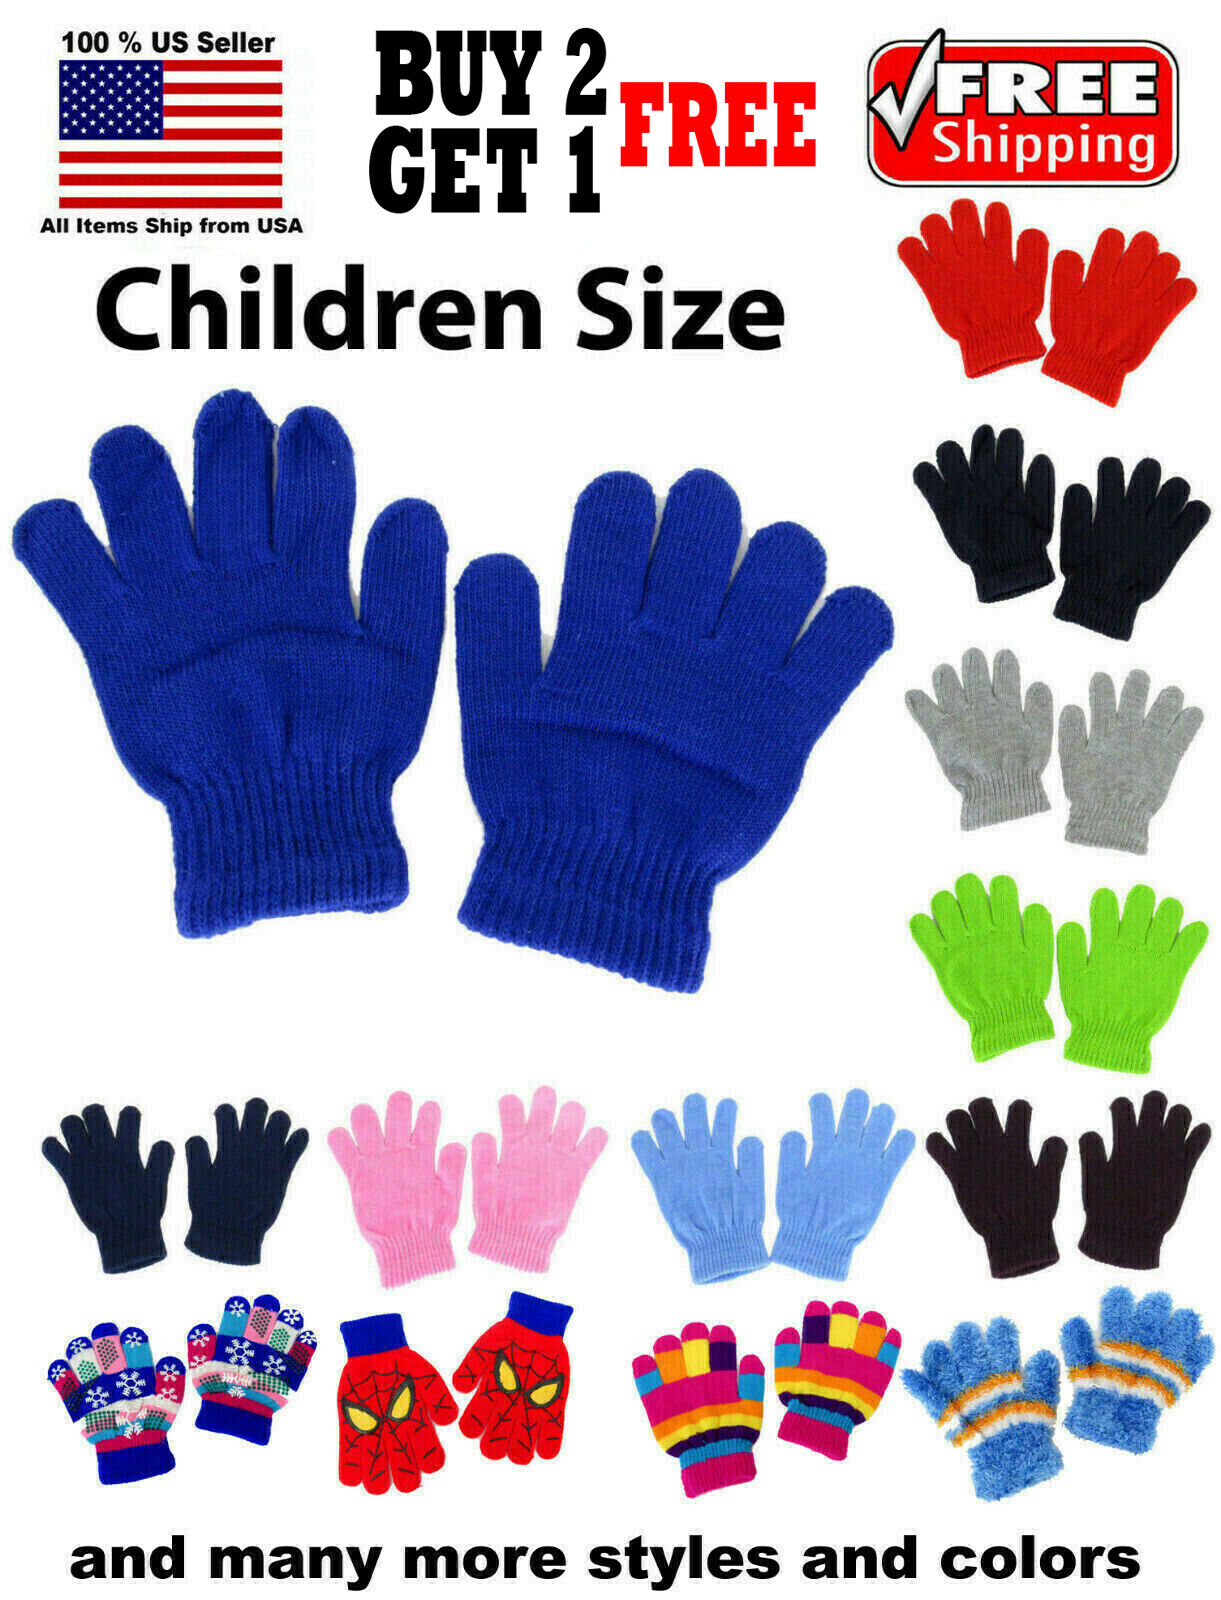 Kids Children Winter Warm Knit Knitted Casual Gloves Stretch One Size